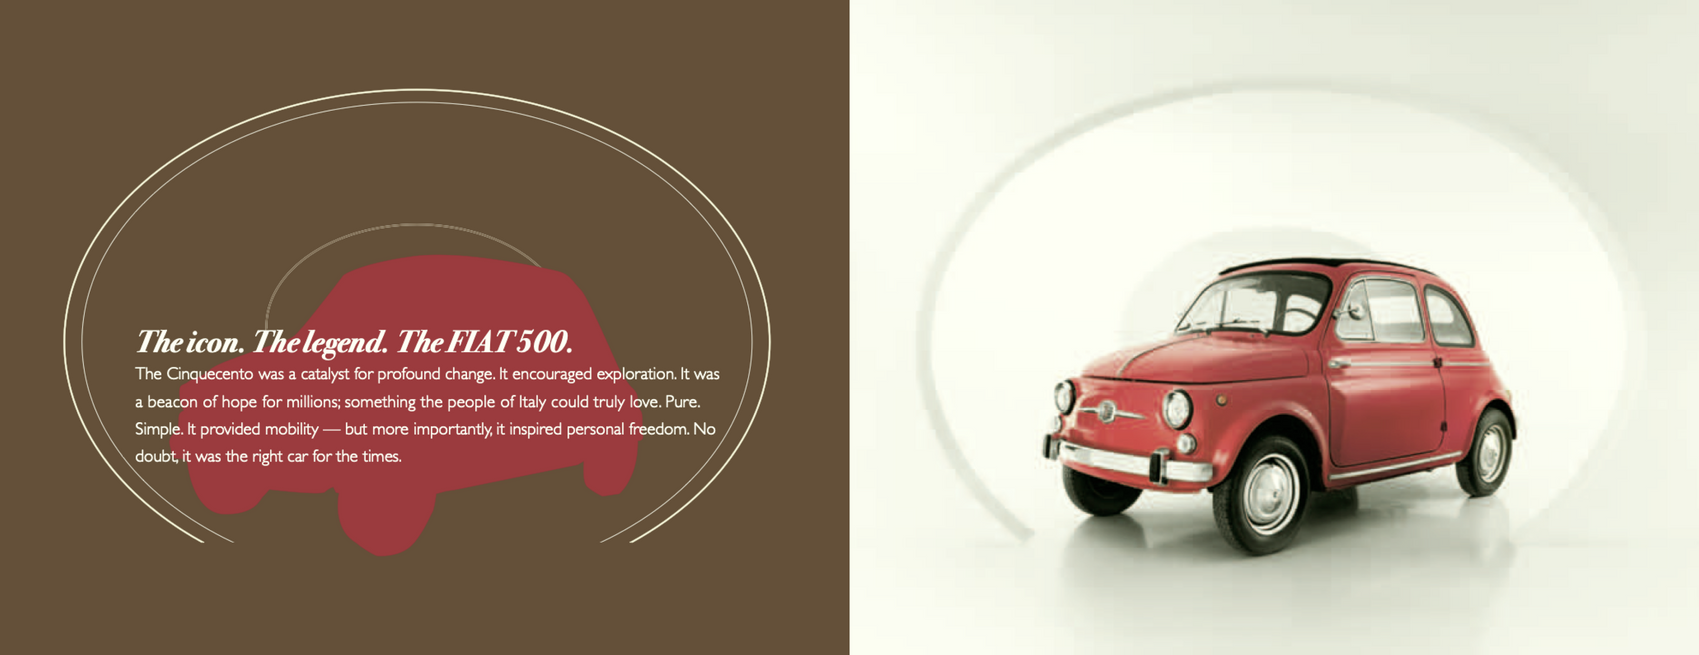 Tin Box Fiat 500 - Good Things Are Ahead Of You 